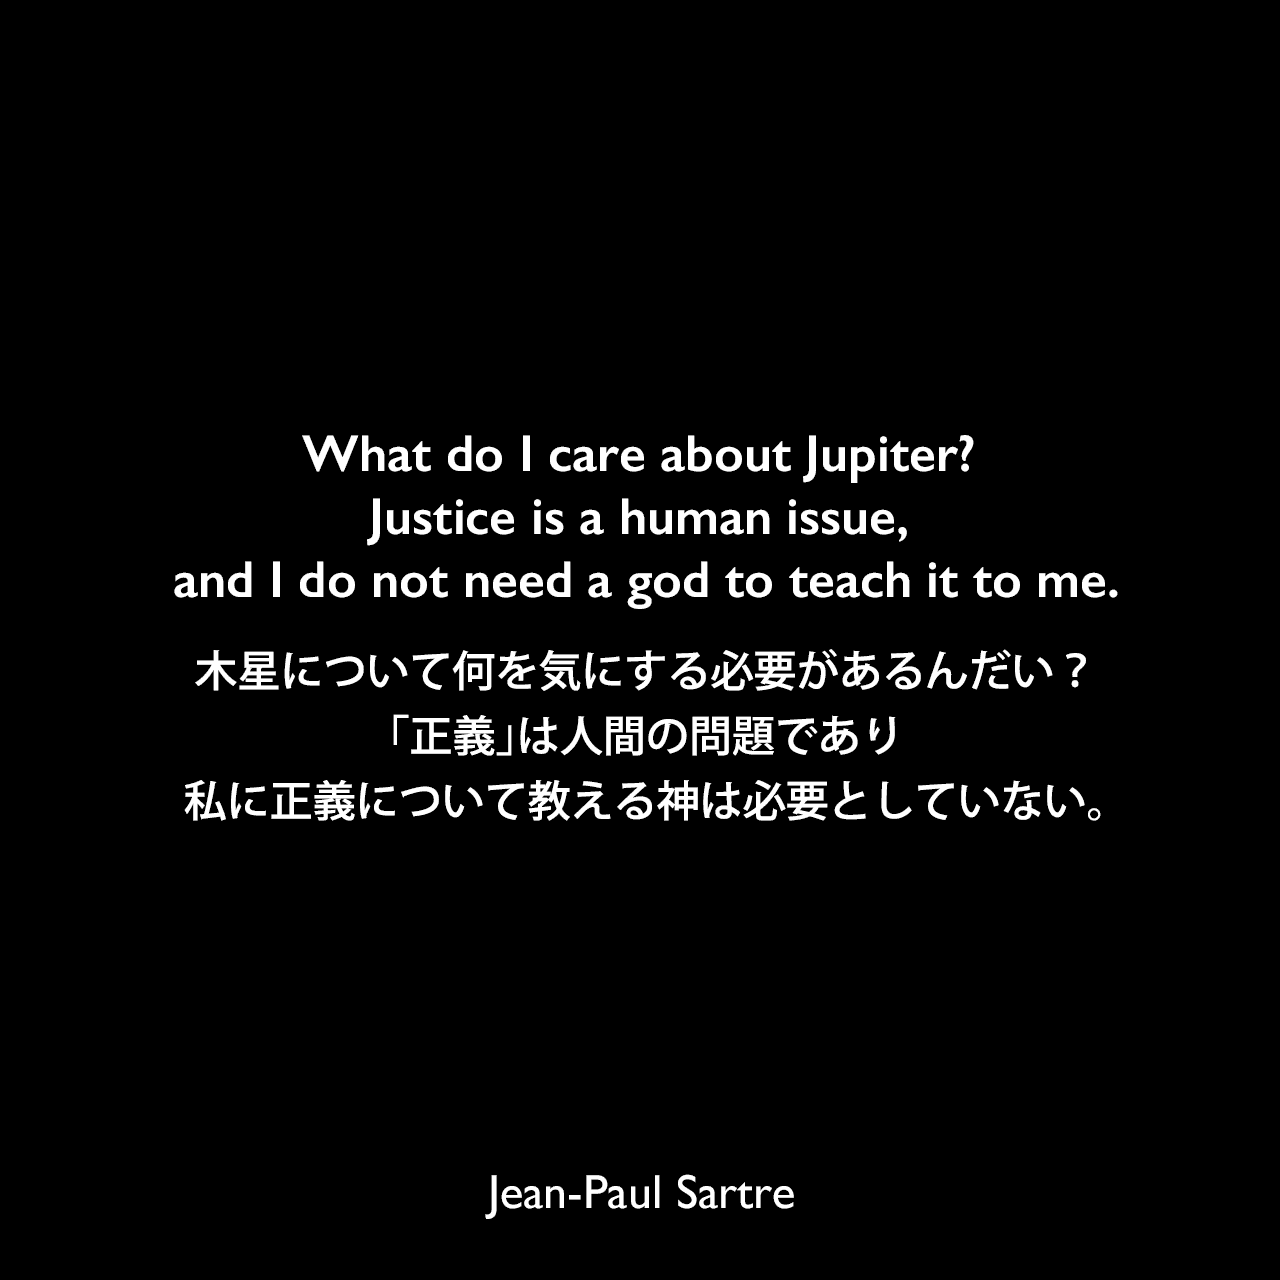 What do I care about Jupiter? Justice is a human issue, and I do not need a god to teach it to me.木星について何を気にする必要があるんだい？「正義」は人間の問題であり、私に正義について教える神は必要としていない。- サルトルによる戯曲「蝿」よりJean-Paul Sartre